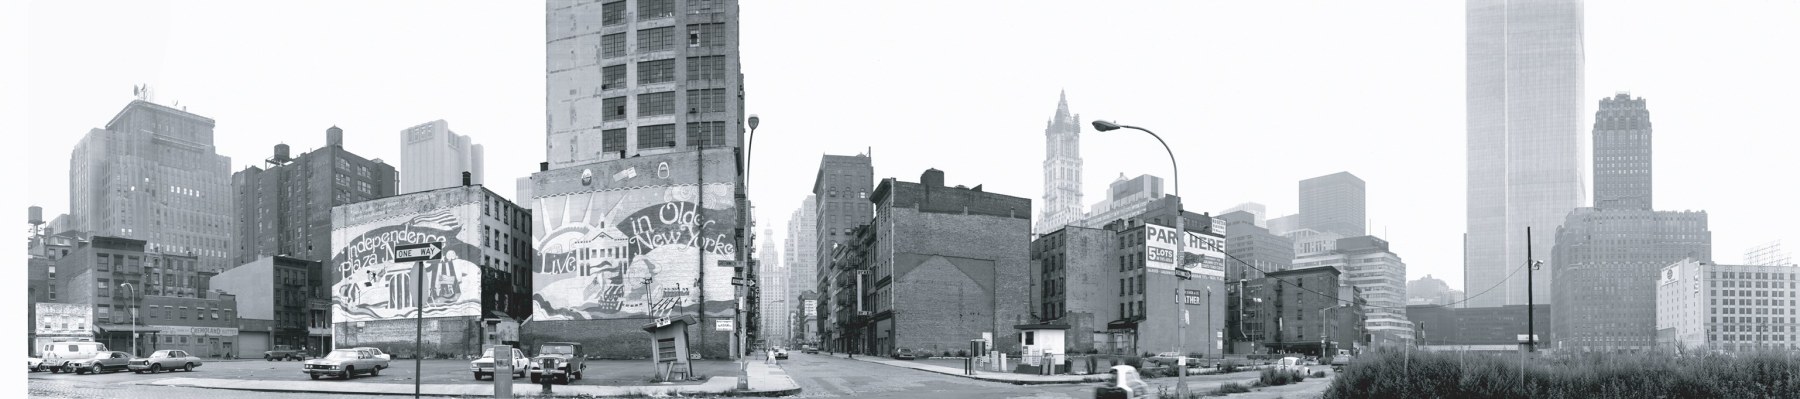 Corner of Chambers and Greenwich Streets, 1979

gelatin silver print, edition of 5

15 1/2 x 70 1/2 in. / 39.4 x 179.1 cm